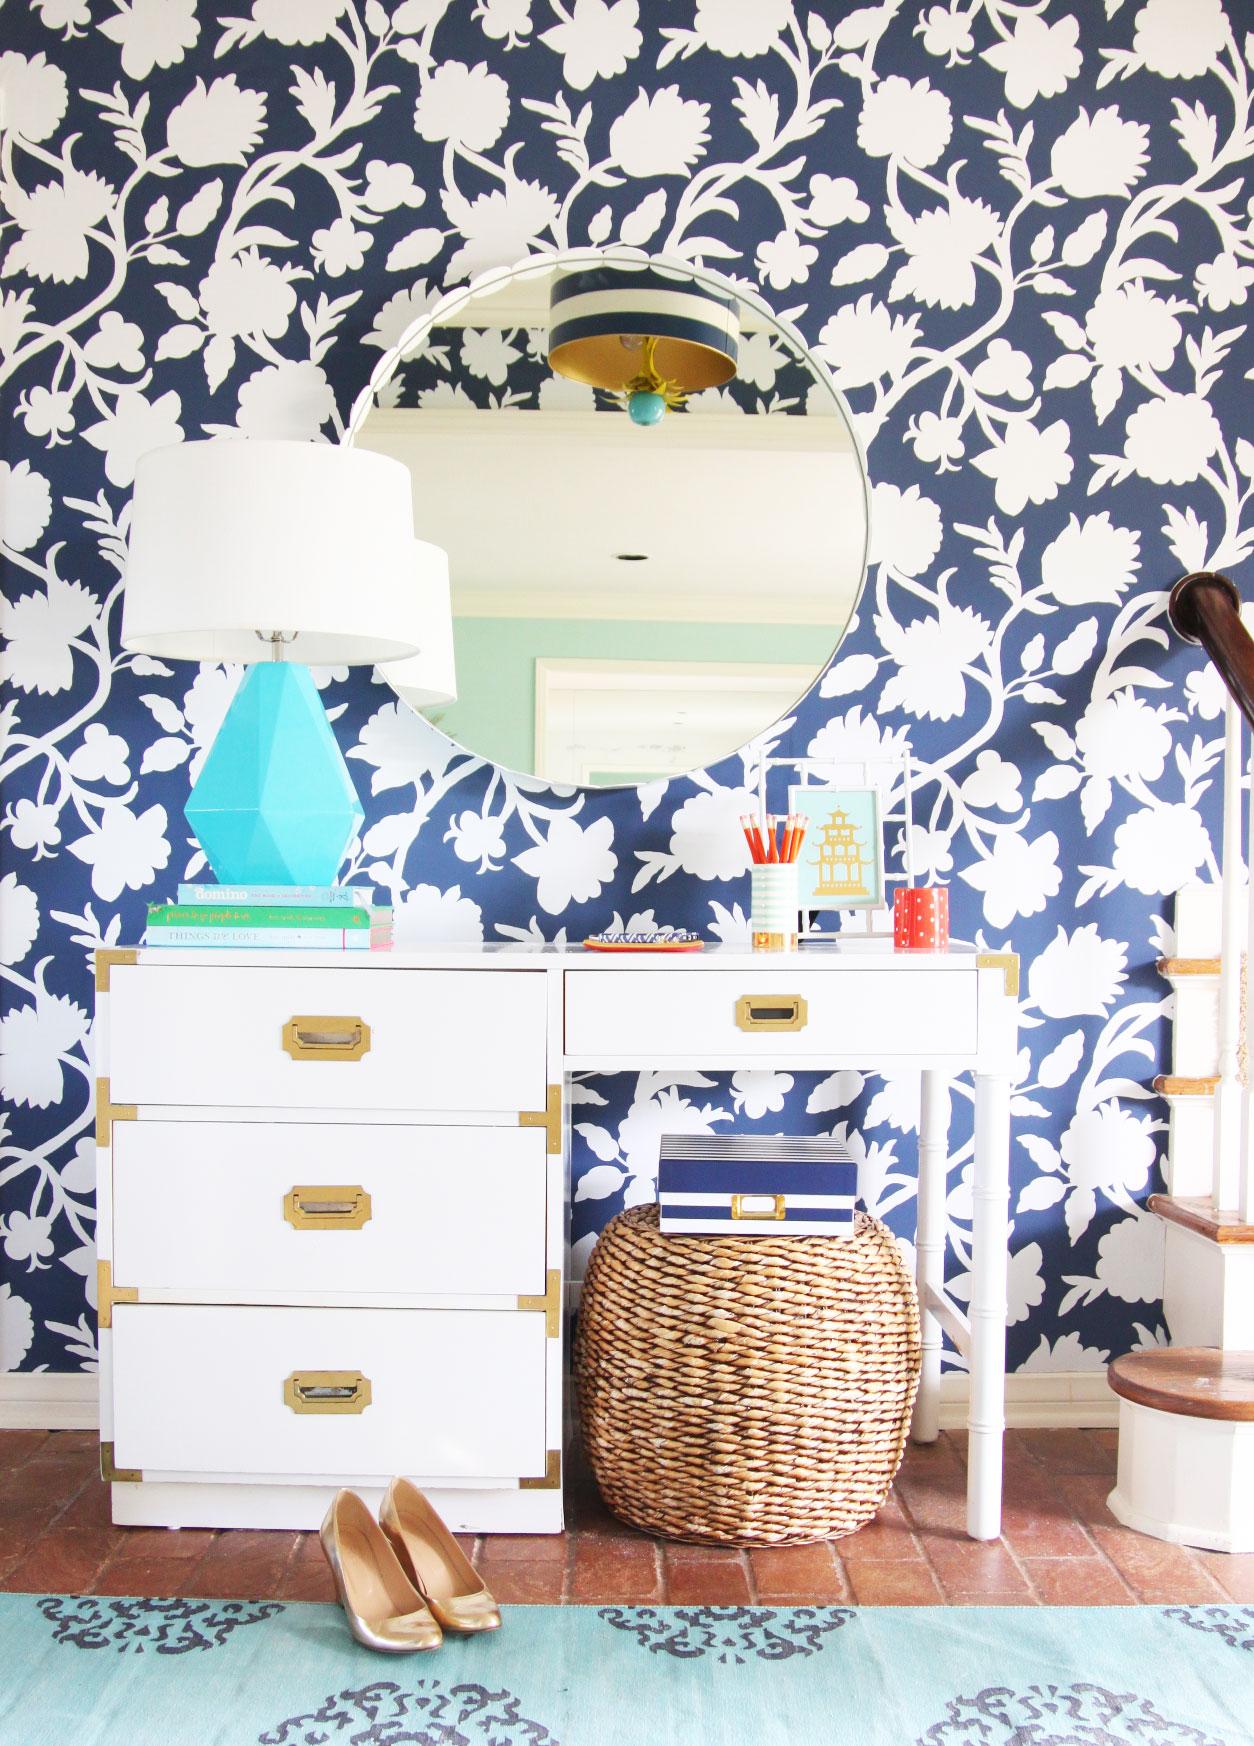 Entryway makeover with graphic floral wallpaper (Thibaut Cabrera in navy) at Pencil Shavings Studio. White campaign desk, Robert Abbey Delta lamp, Stray Dog Designs striped drum pendant www.pencilshavingsstudio.com